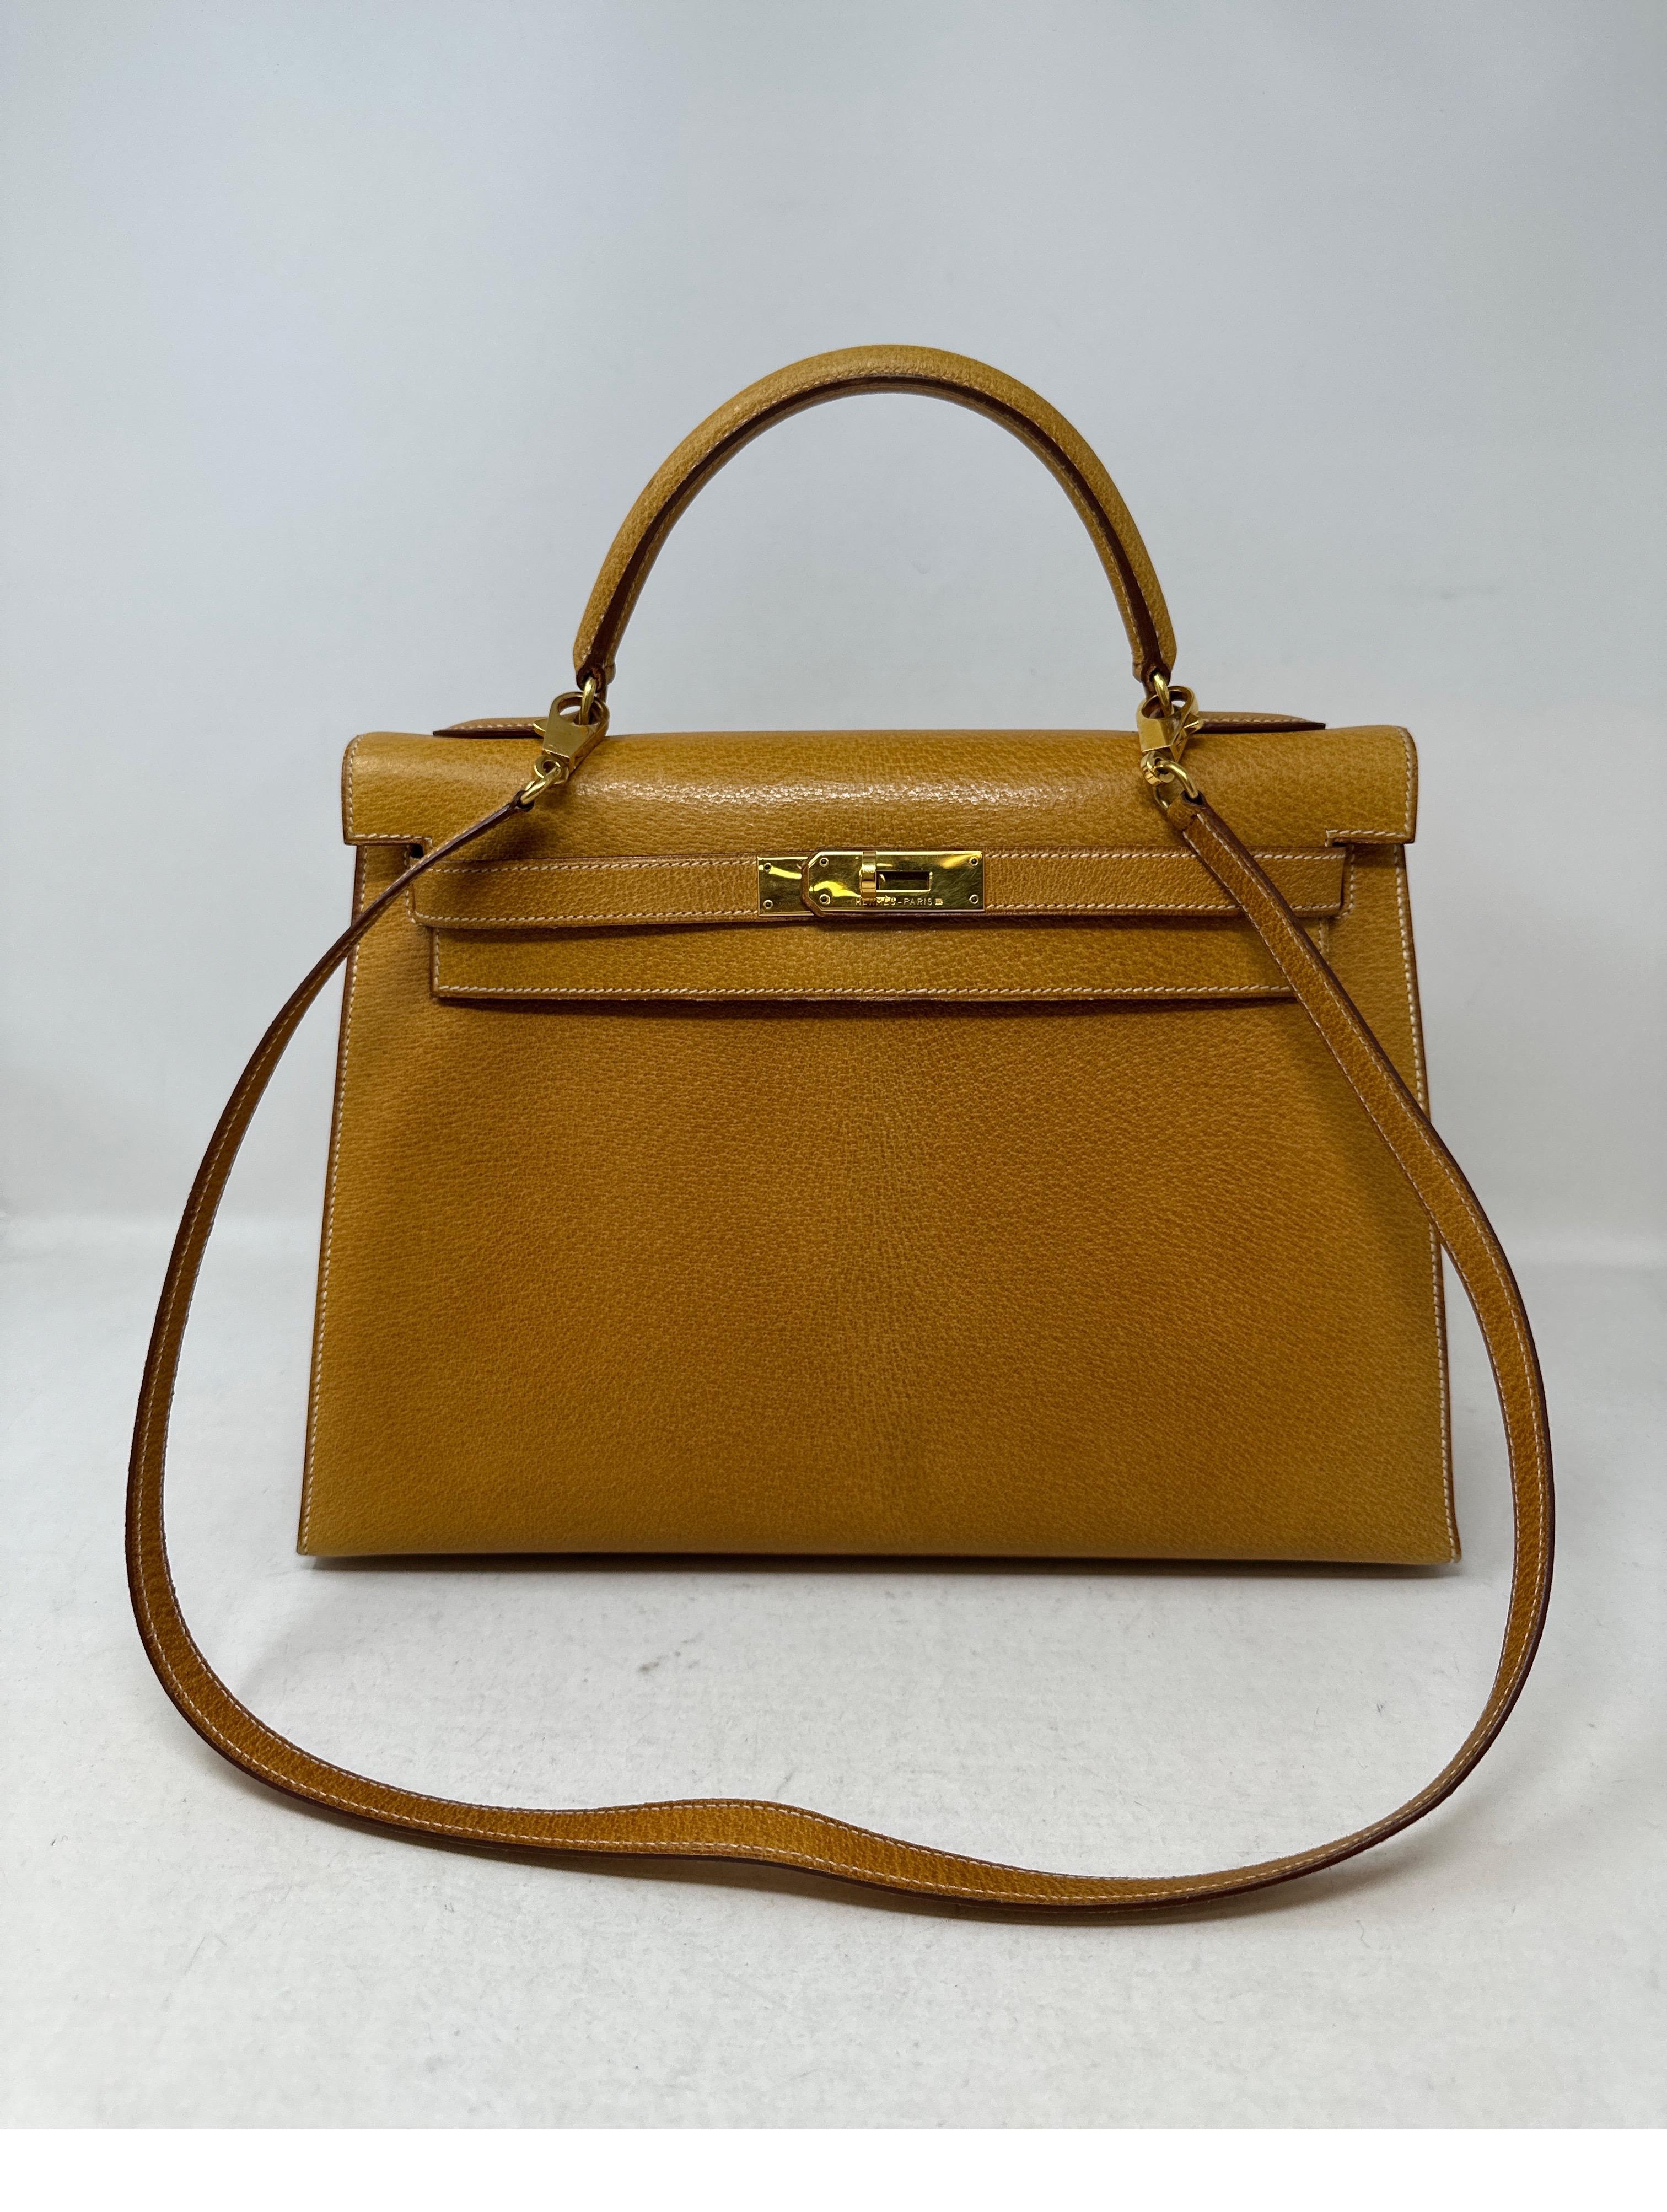 Hermes Sellier Kelly 32 Bag. Good vintage condition. Interior clean. Natural tan color chevre leather. It is a vintage Kelly. The clochette, lock, keys, and dust bag are included. Please note the clochette leather part that holds the keys is torn.